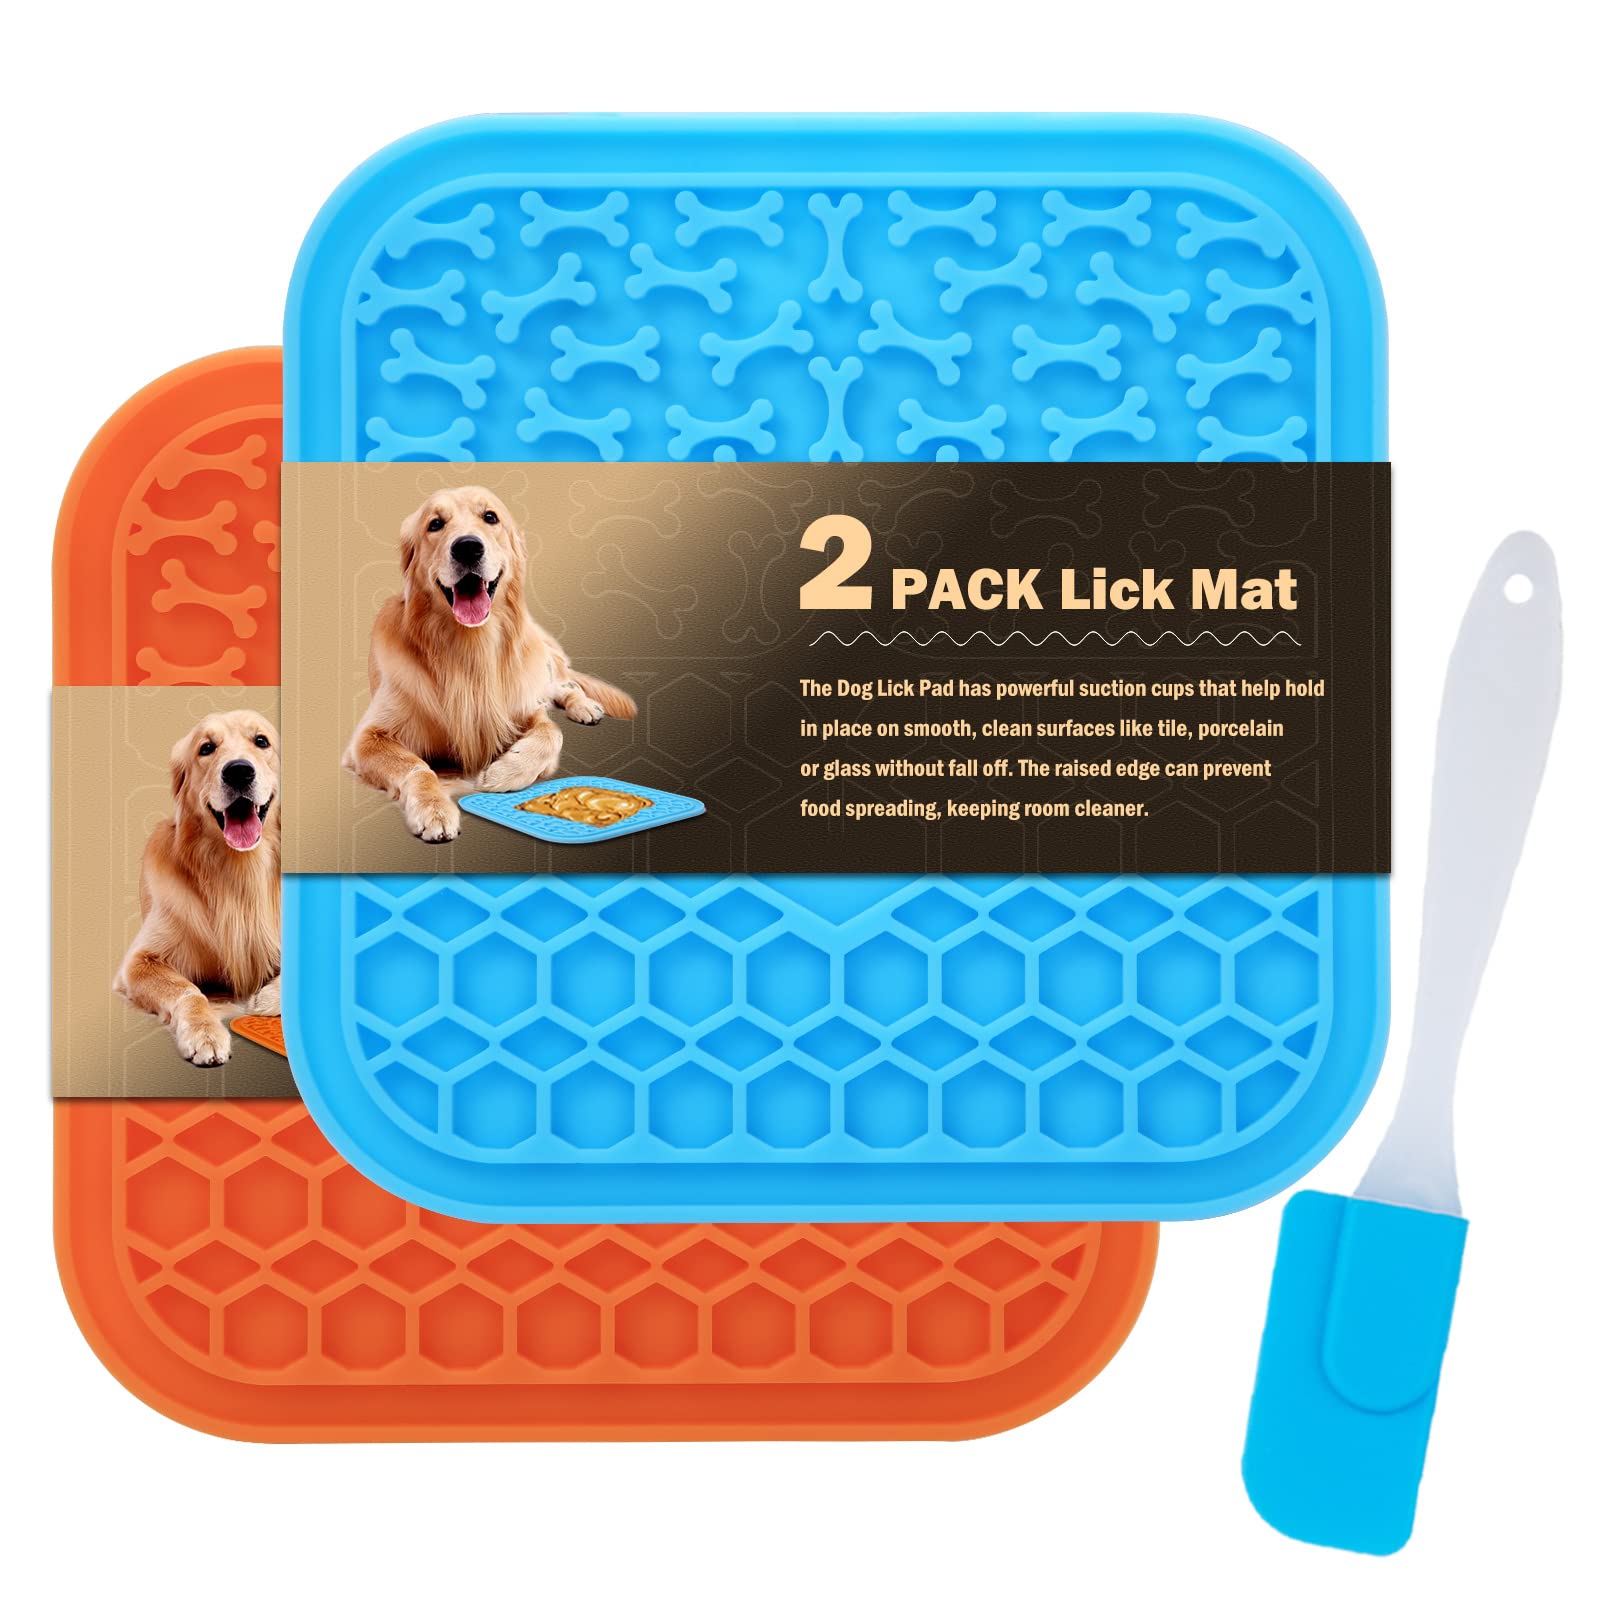 Silicone Lick Pad Slower Feeder Pad Cats Dog Licky Mat Fedding Pads Pet  SupplyBD